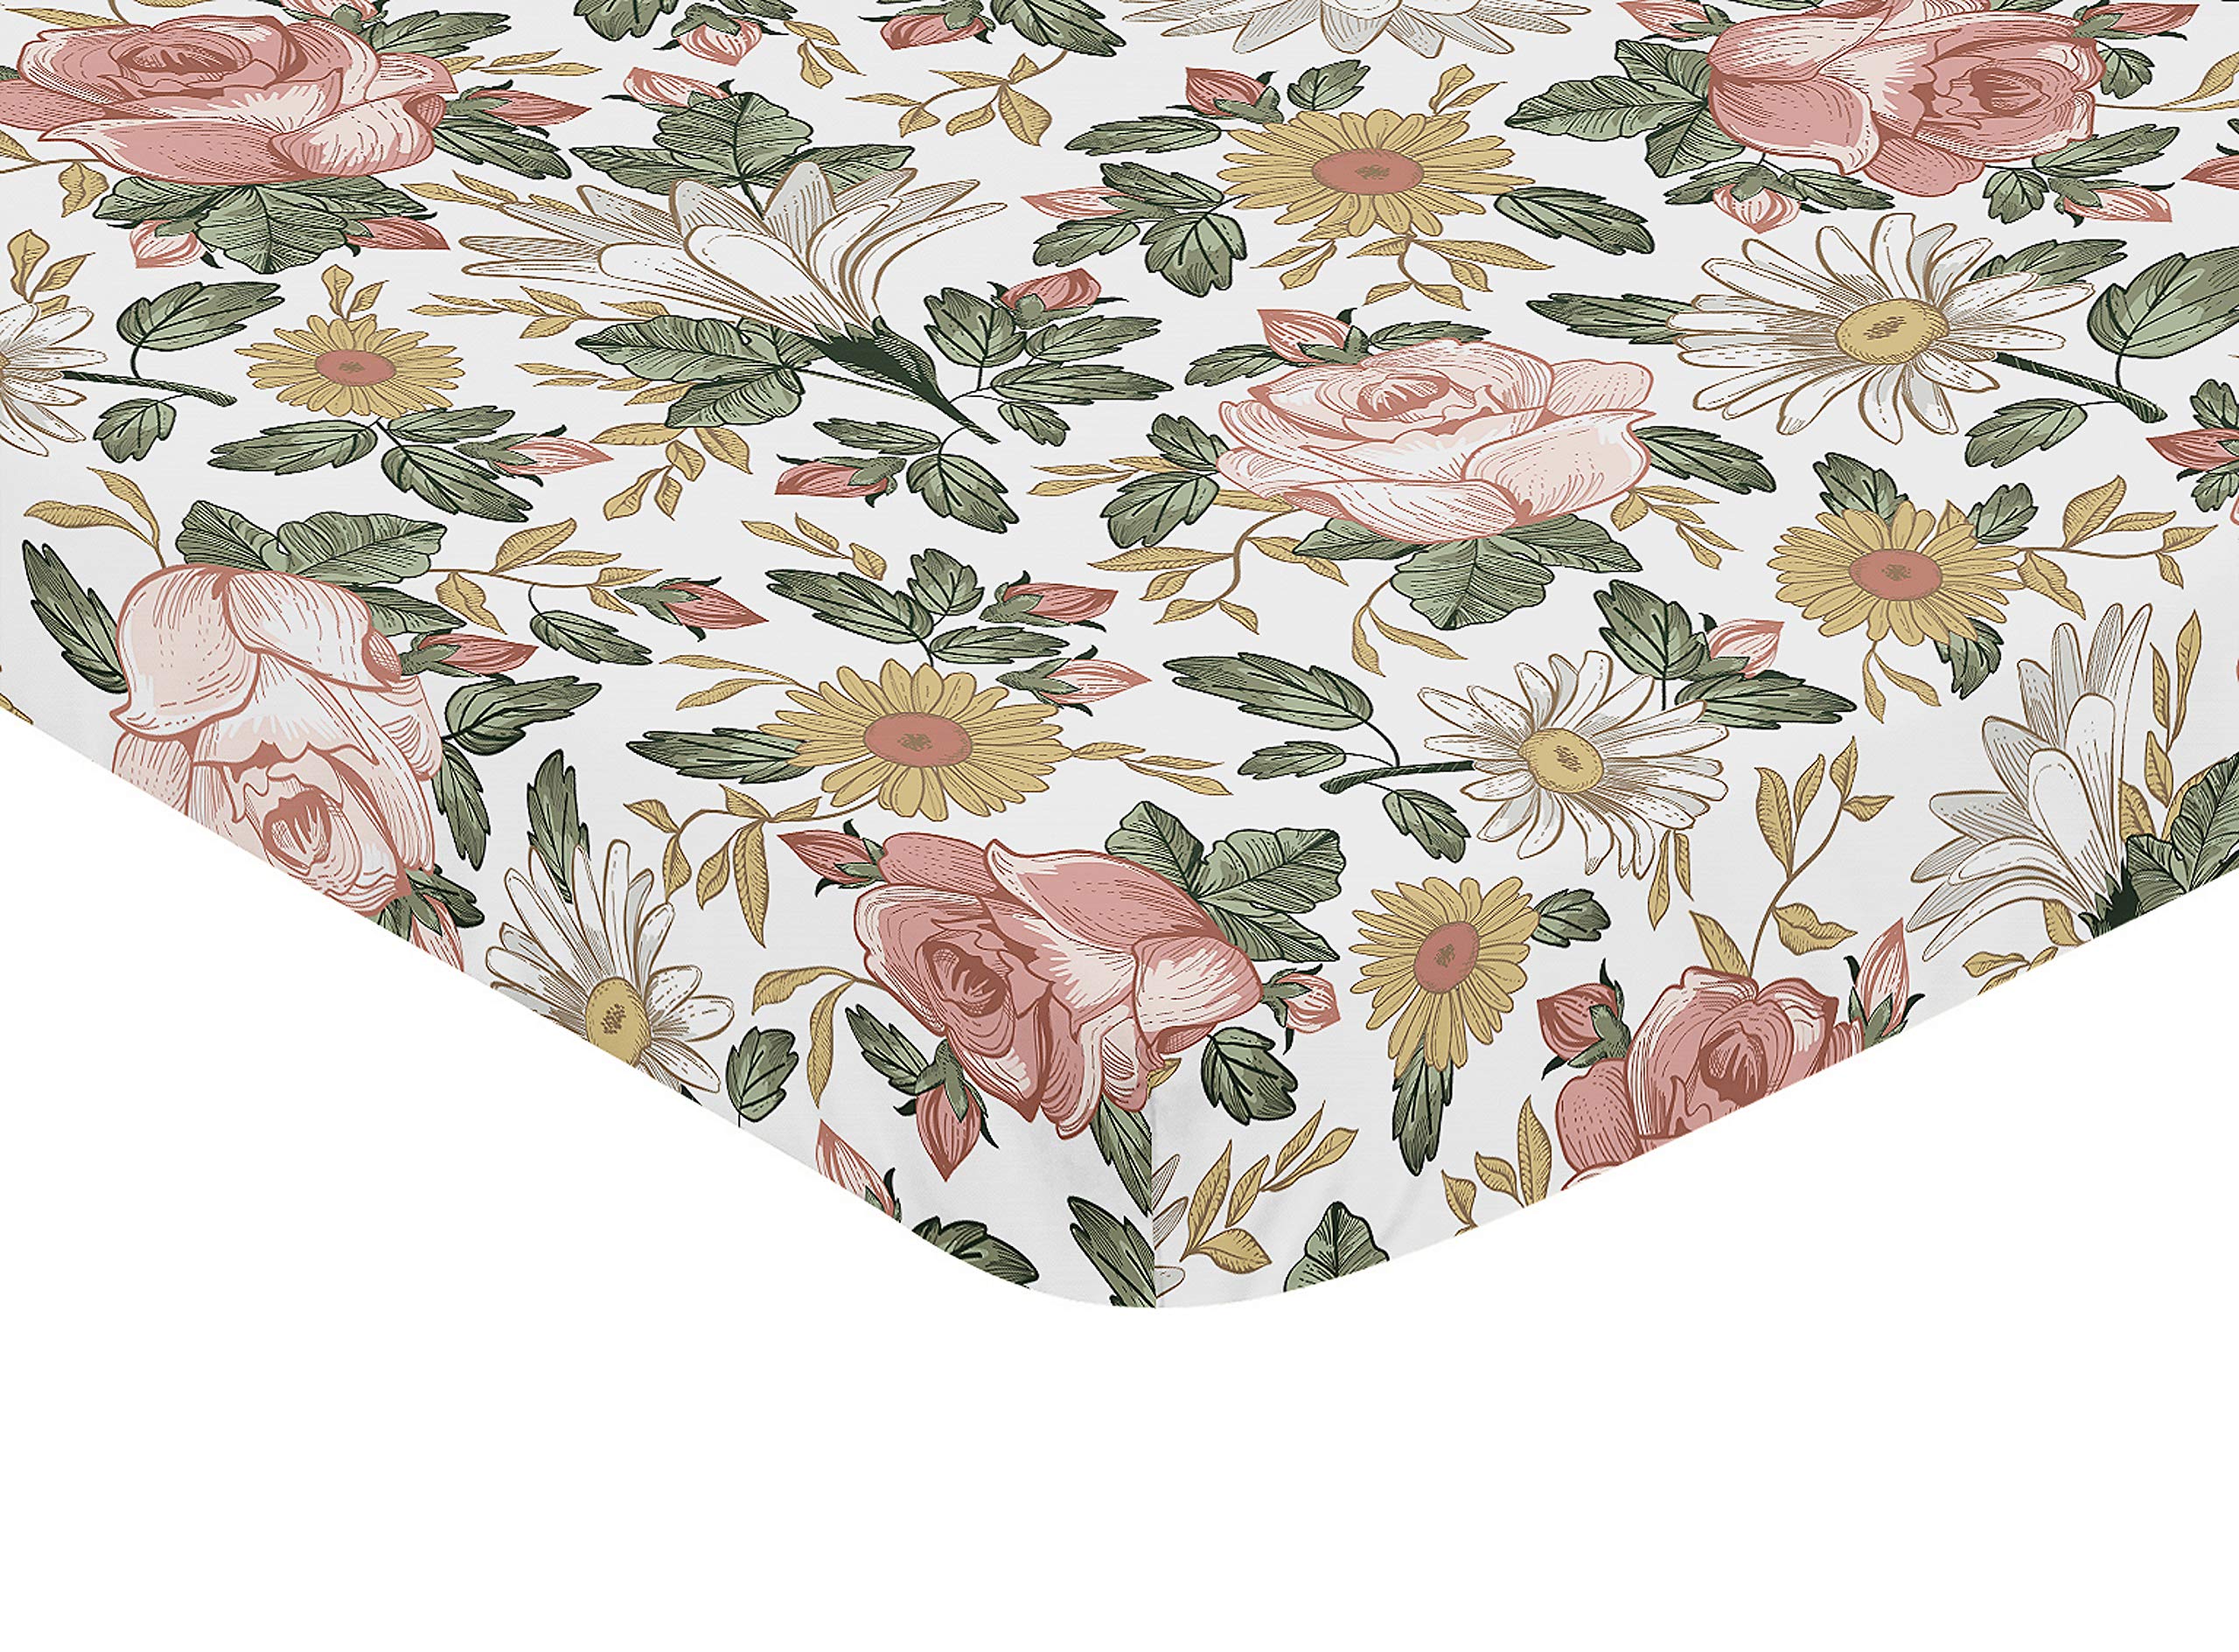 Sweet Jojo Designs Vintage Floral Boho Girl Fitted Mini Crib Sheet Baby Nursery for Portable Crib or Pack and Play - Blush Pink, Yellow, Green and White Shabby Chic Rose Flower Farmhouse